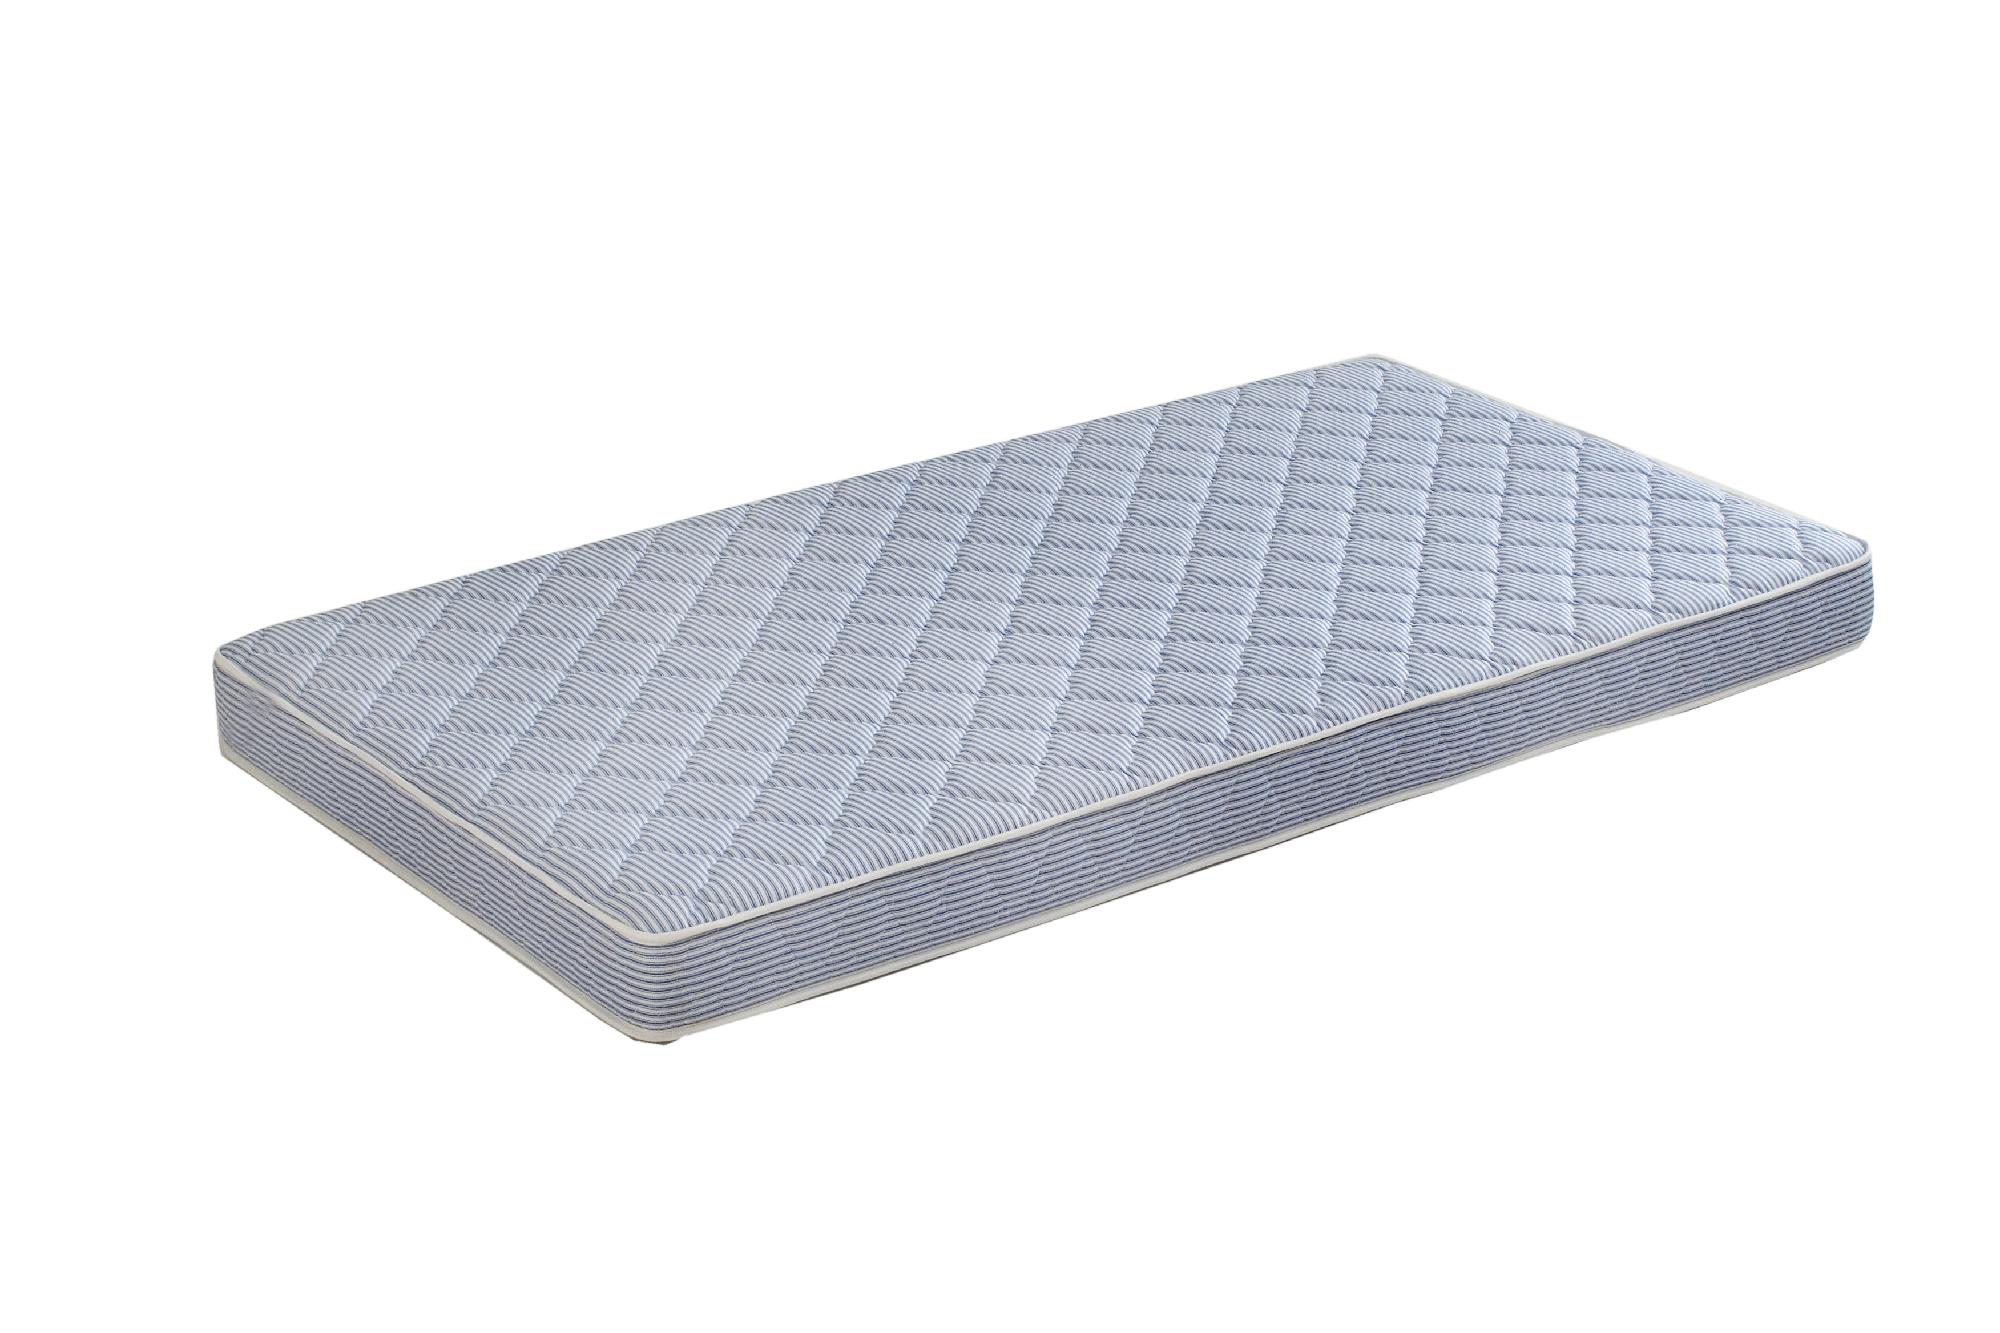 Innerspace Luxury Products 6.5-inch Truck Luxury Reversible Mattress Only - Quilted Both Sides - Twin XL